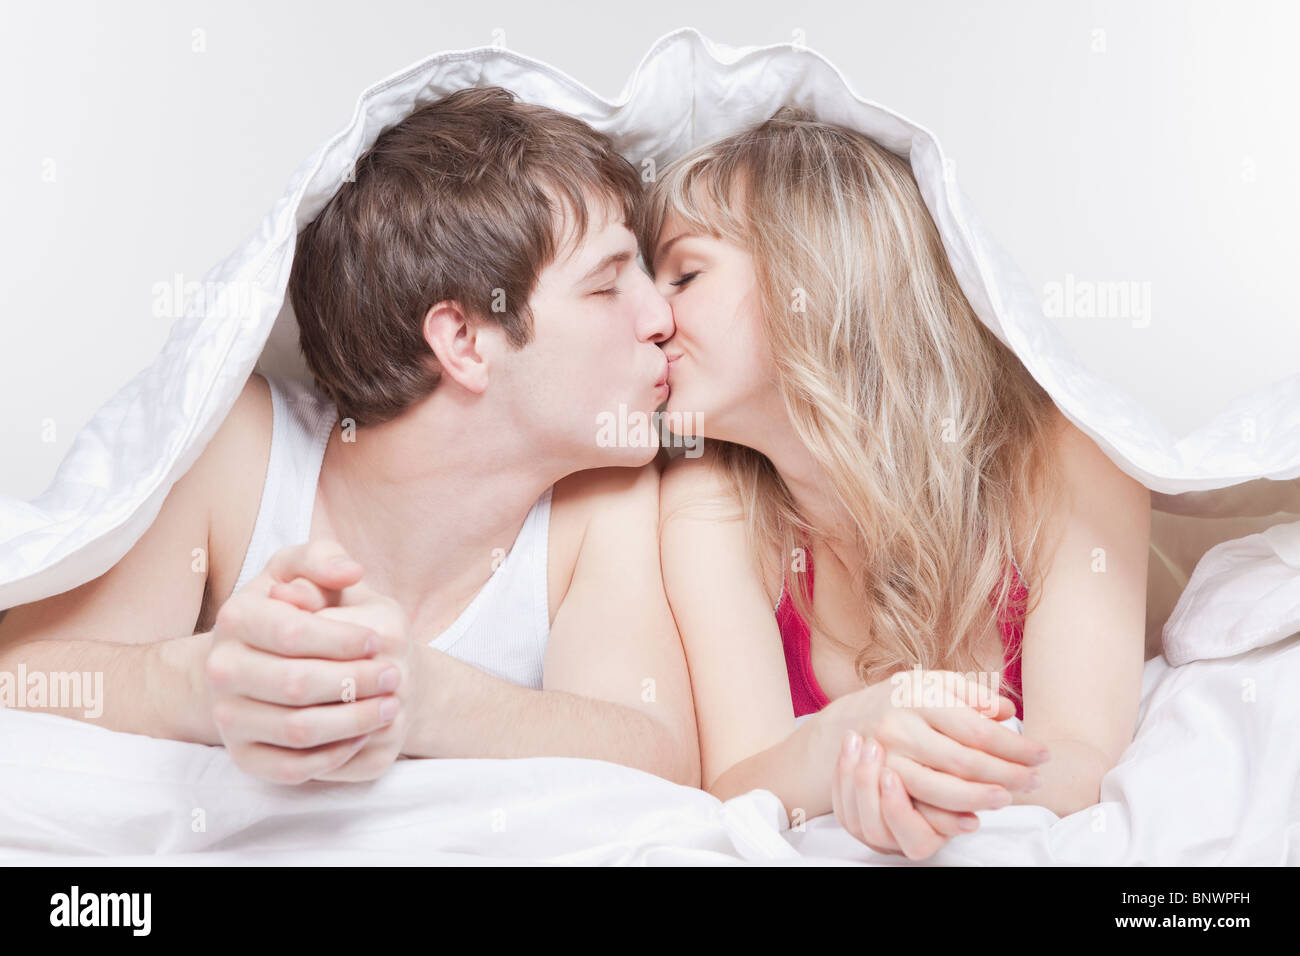 Couple kissing under the covers Stock Photo